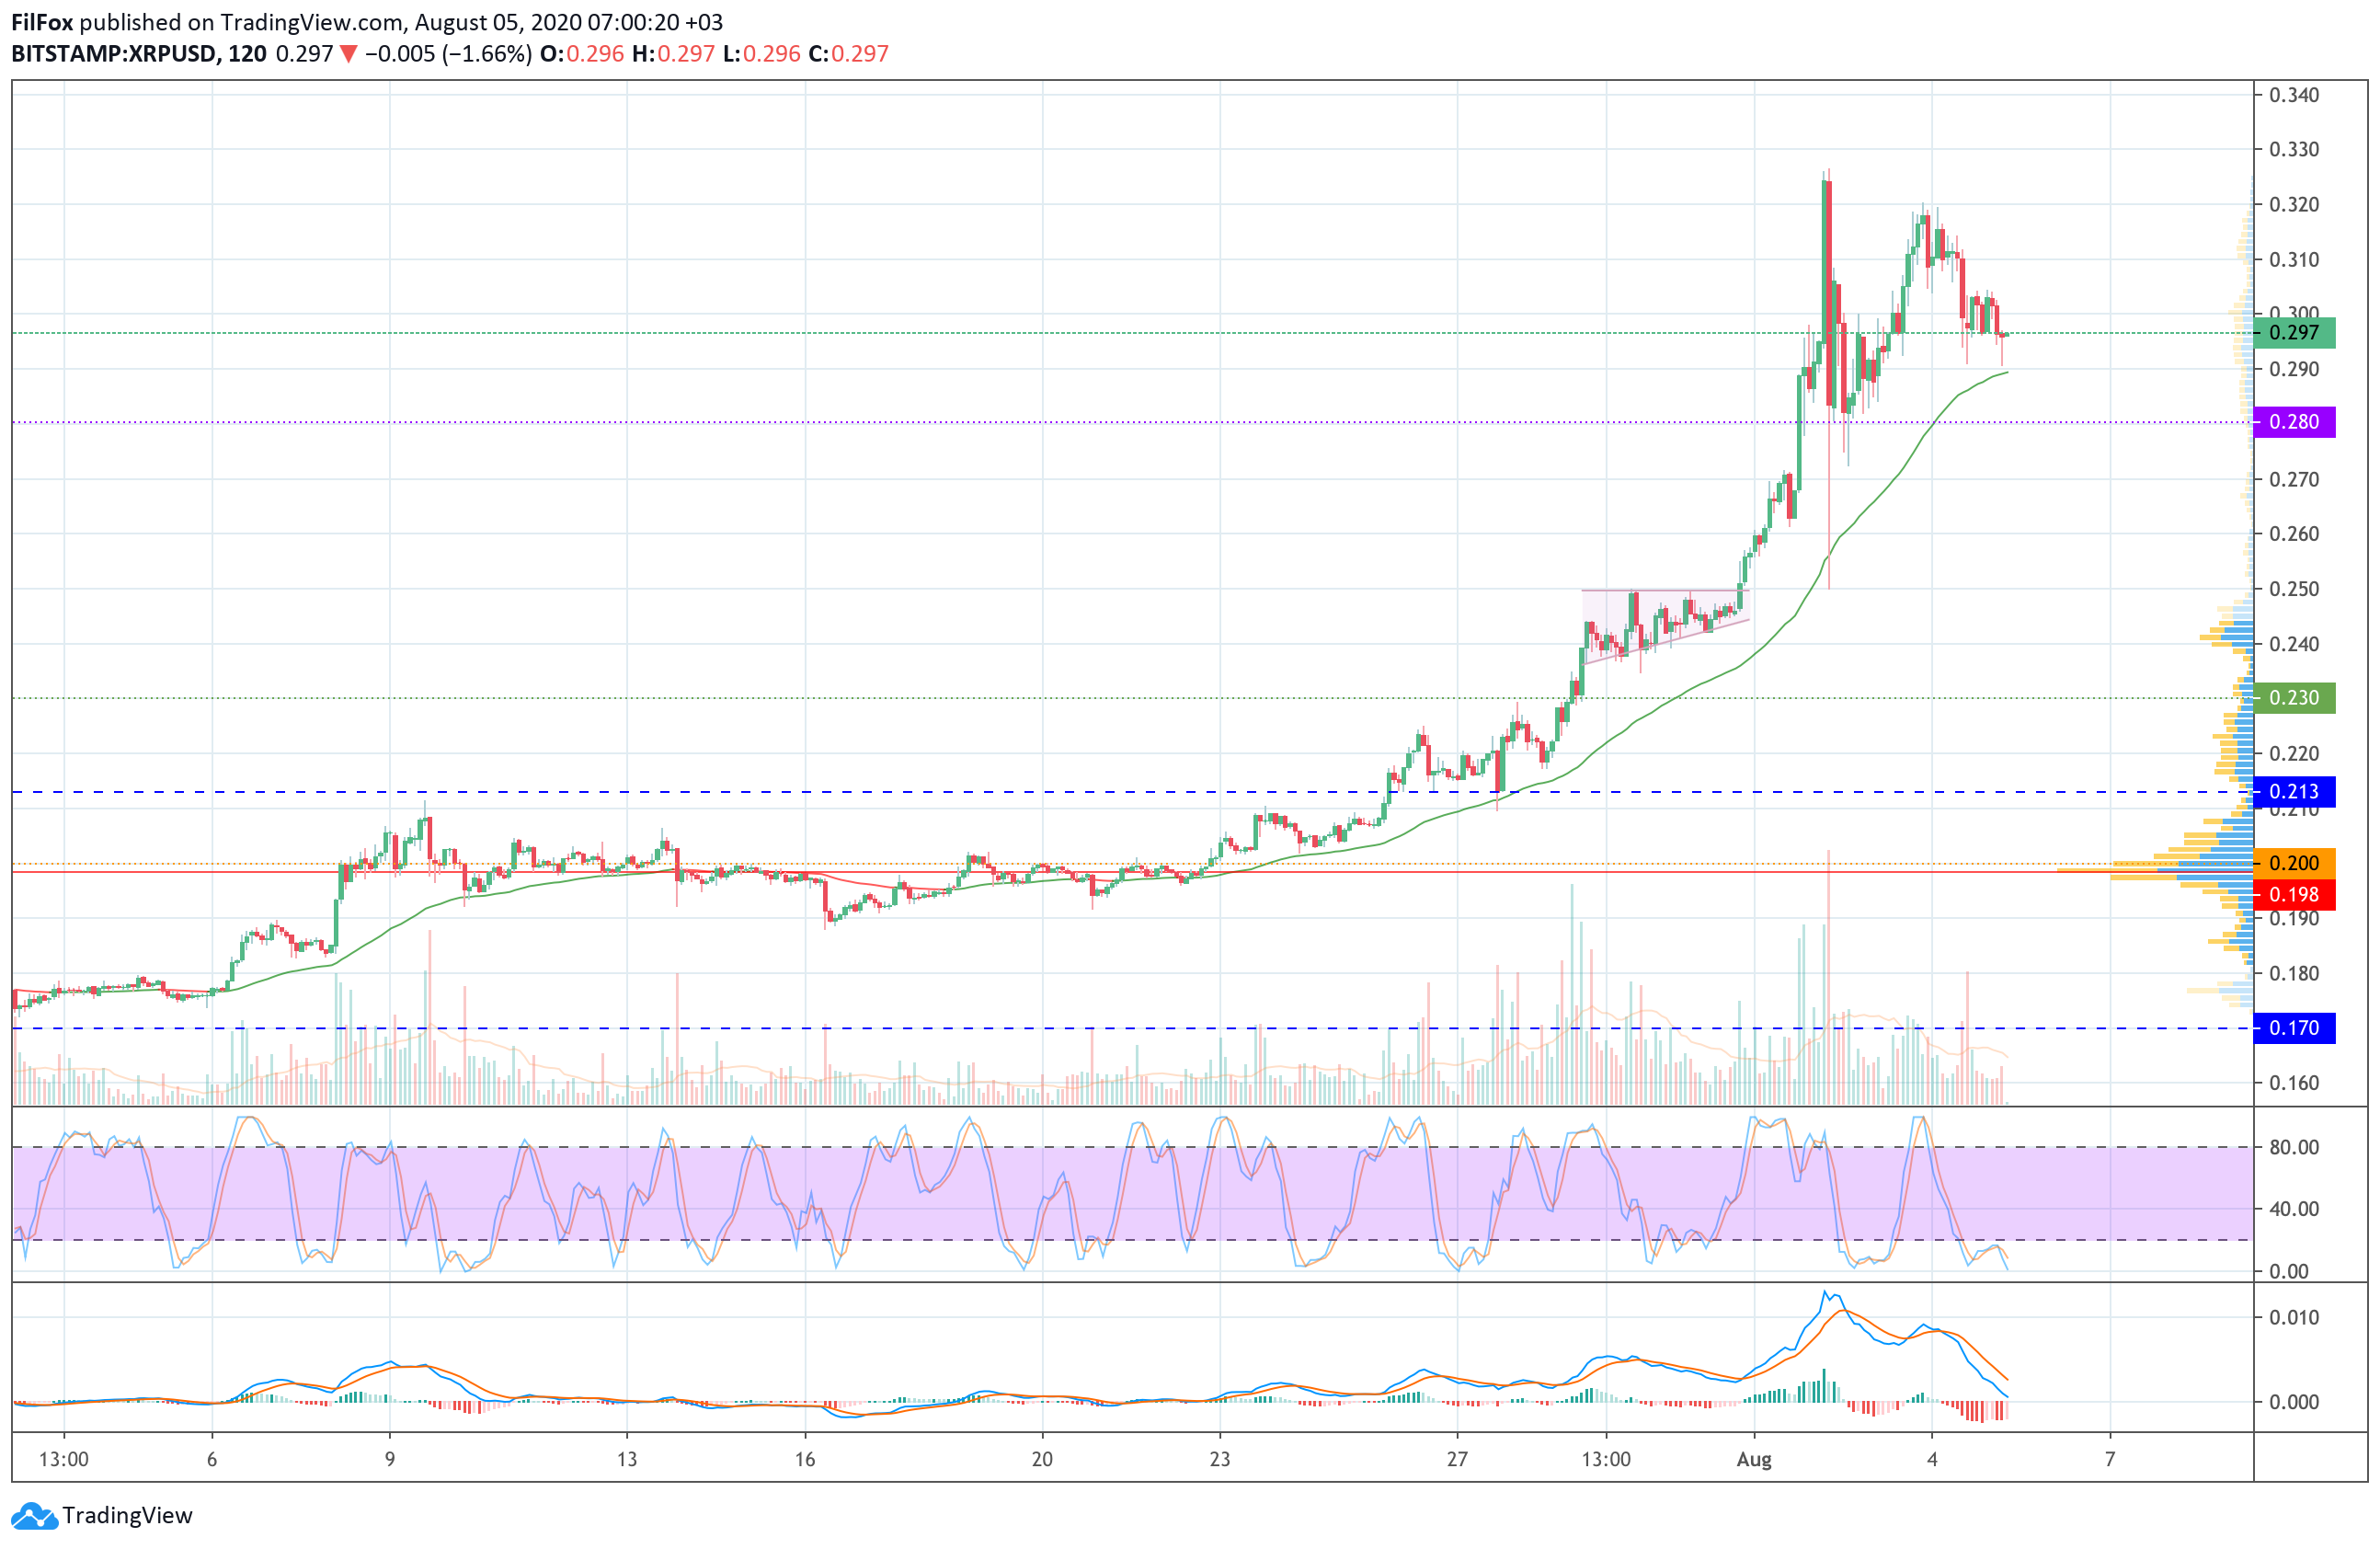 Analysis of prices for Bitcoin, Ethereum, XRP for 08/05/2020